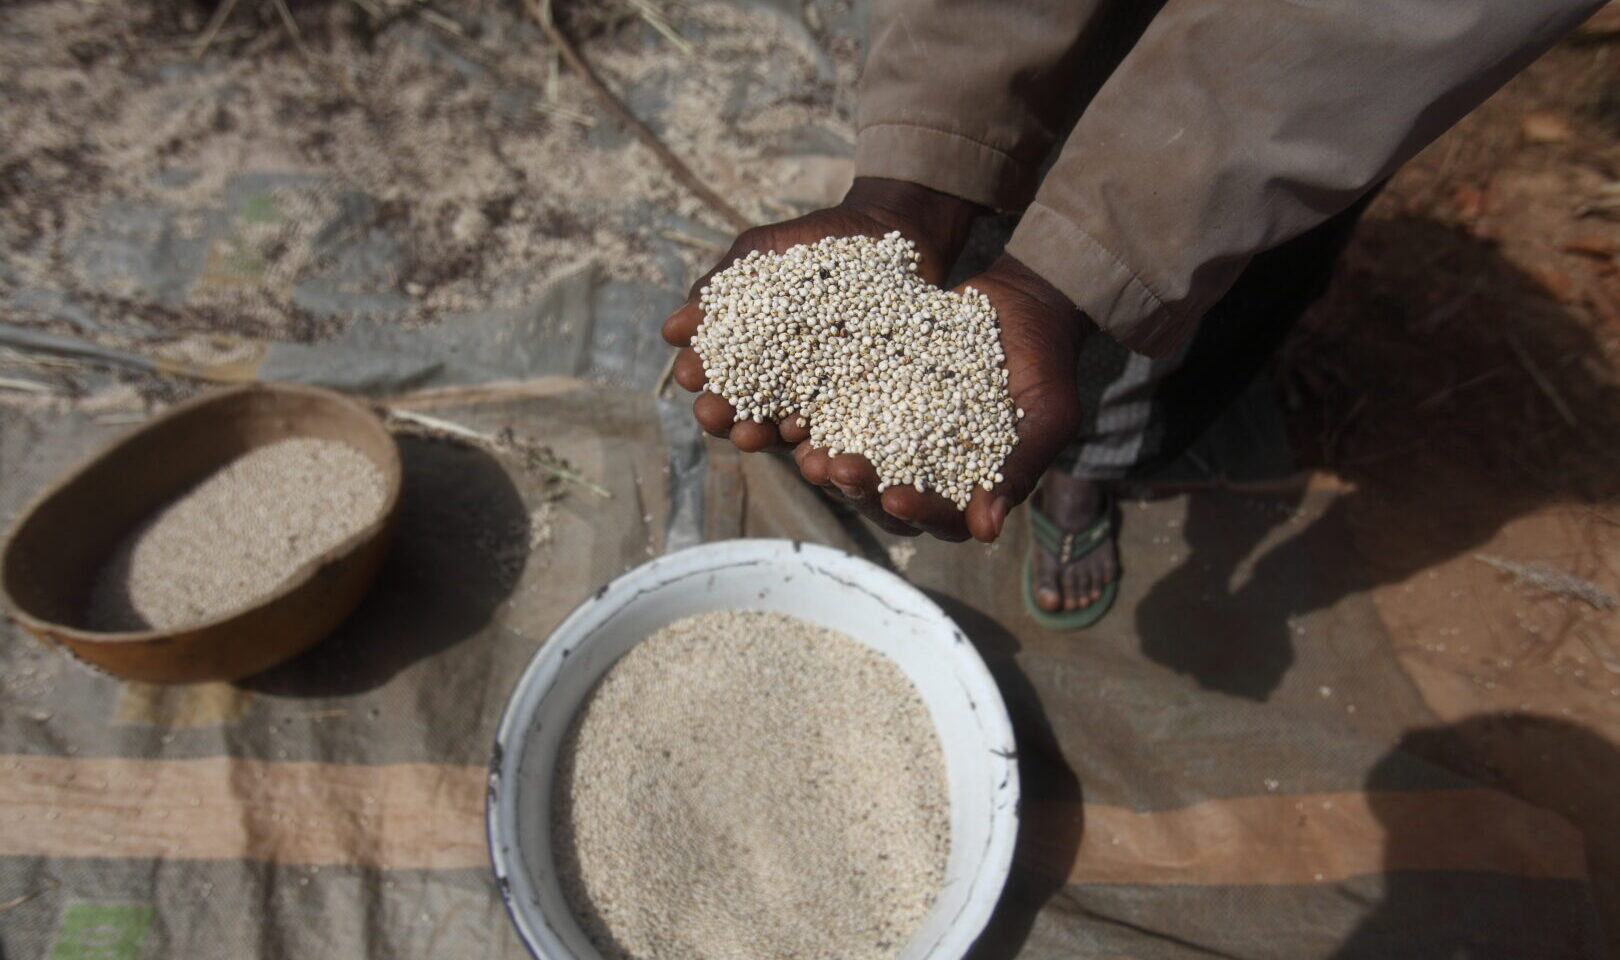 Hands cupped holding grains